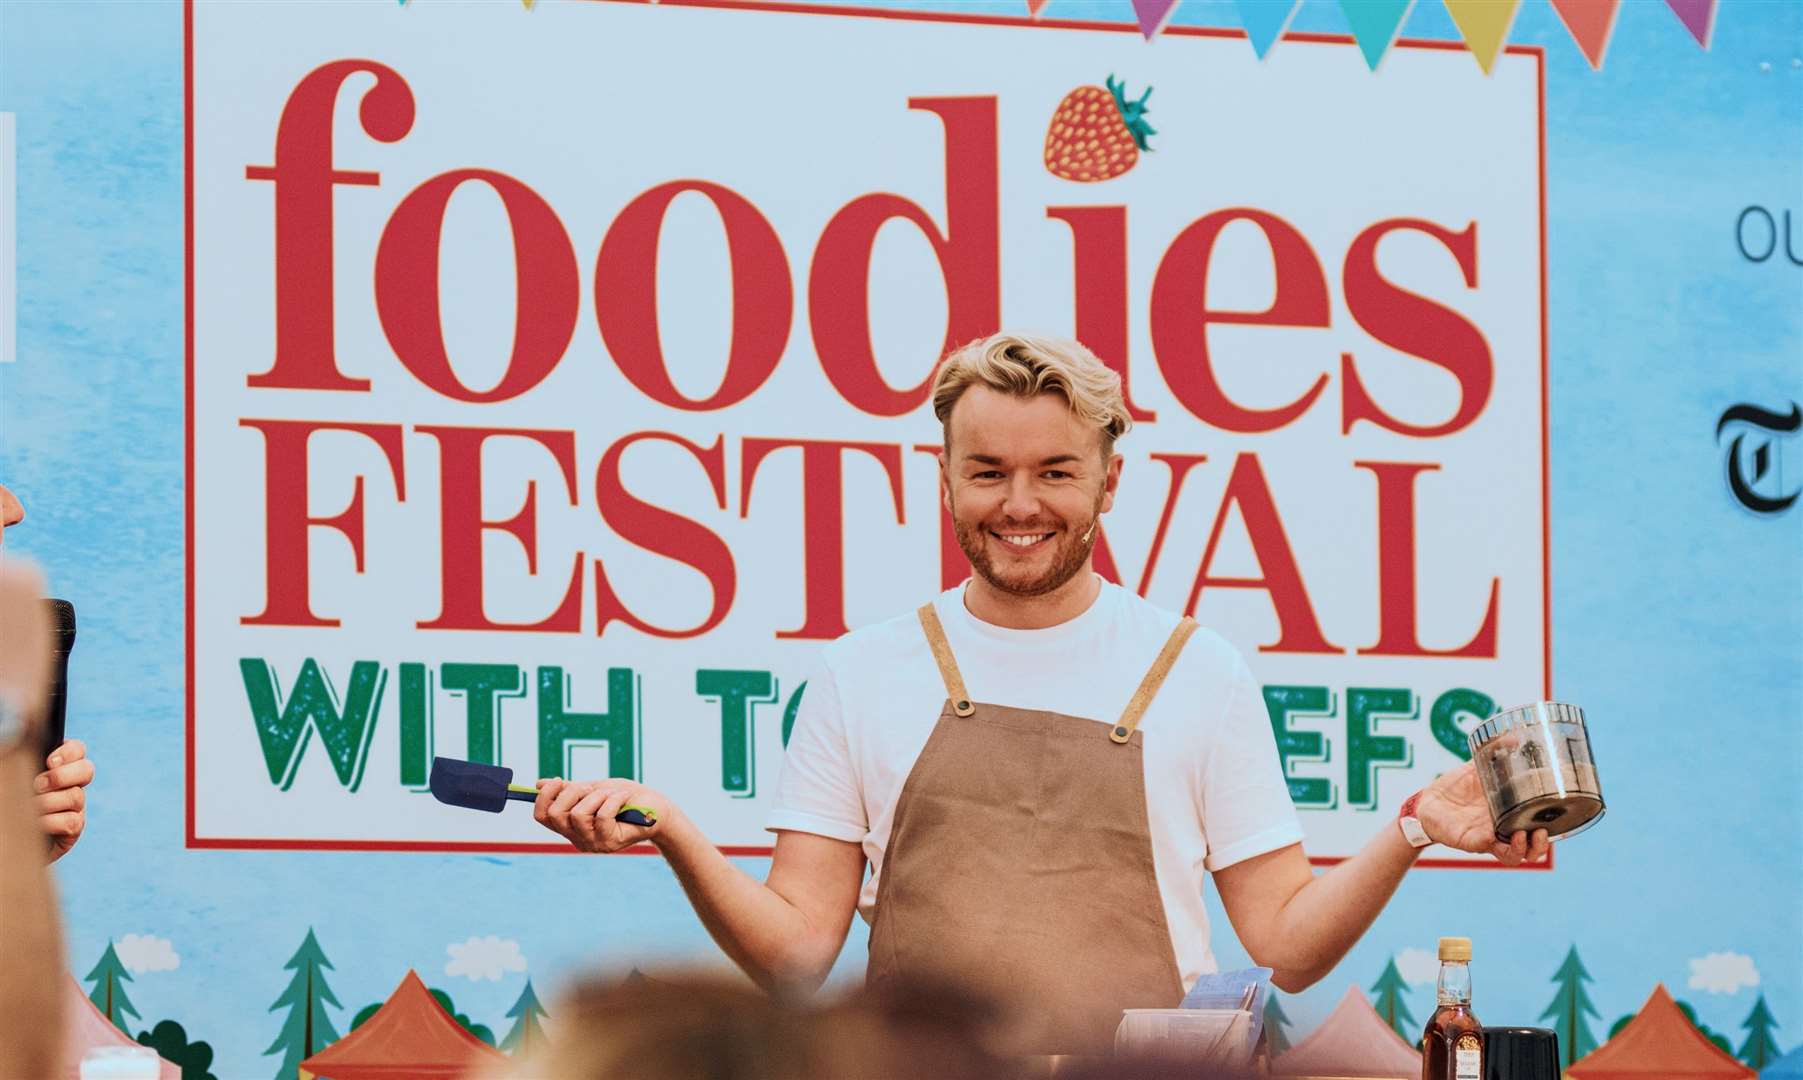 MasterChef winner Tom Rhodes is one of the guest chefs appearing at Foodies Festival. Picture: Supplied by Foodies Festival